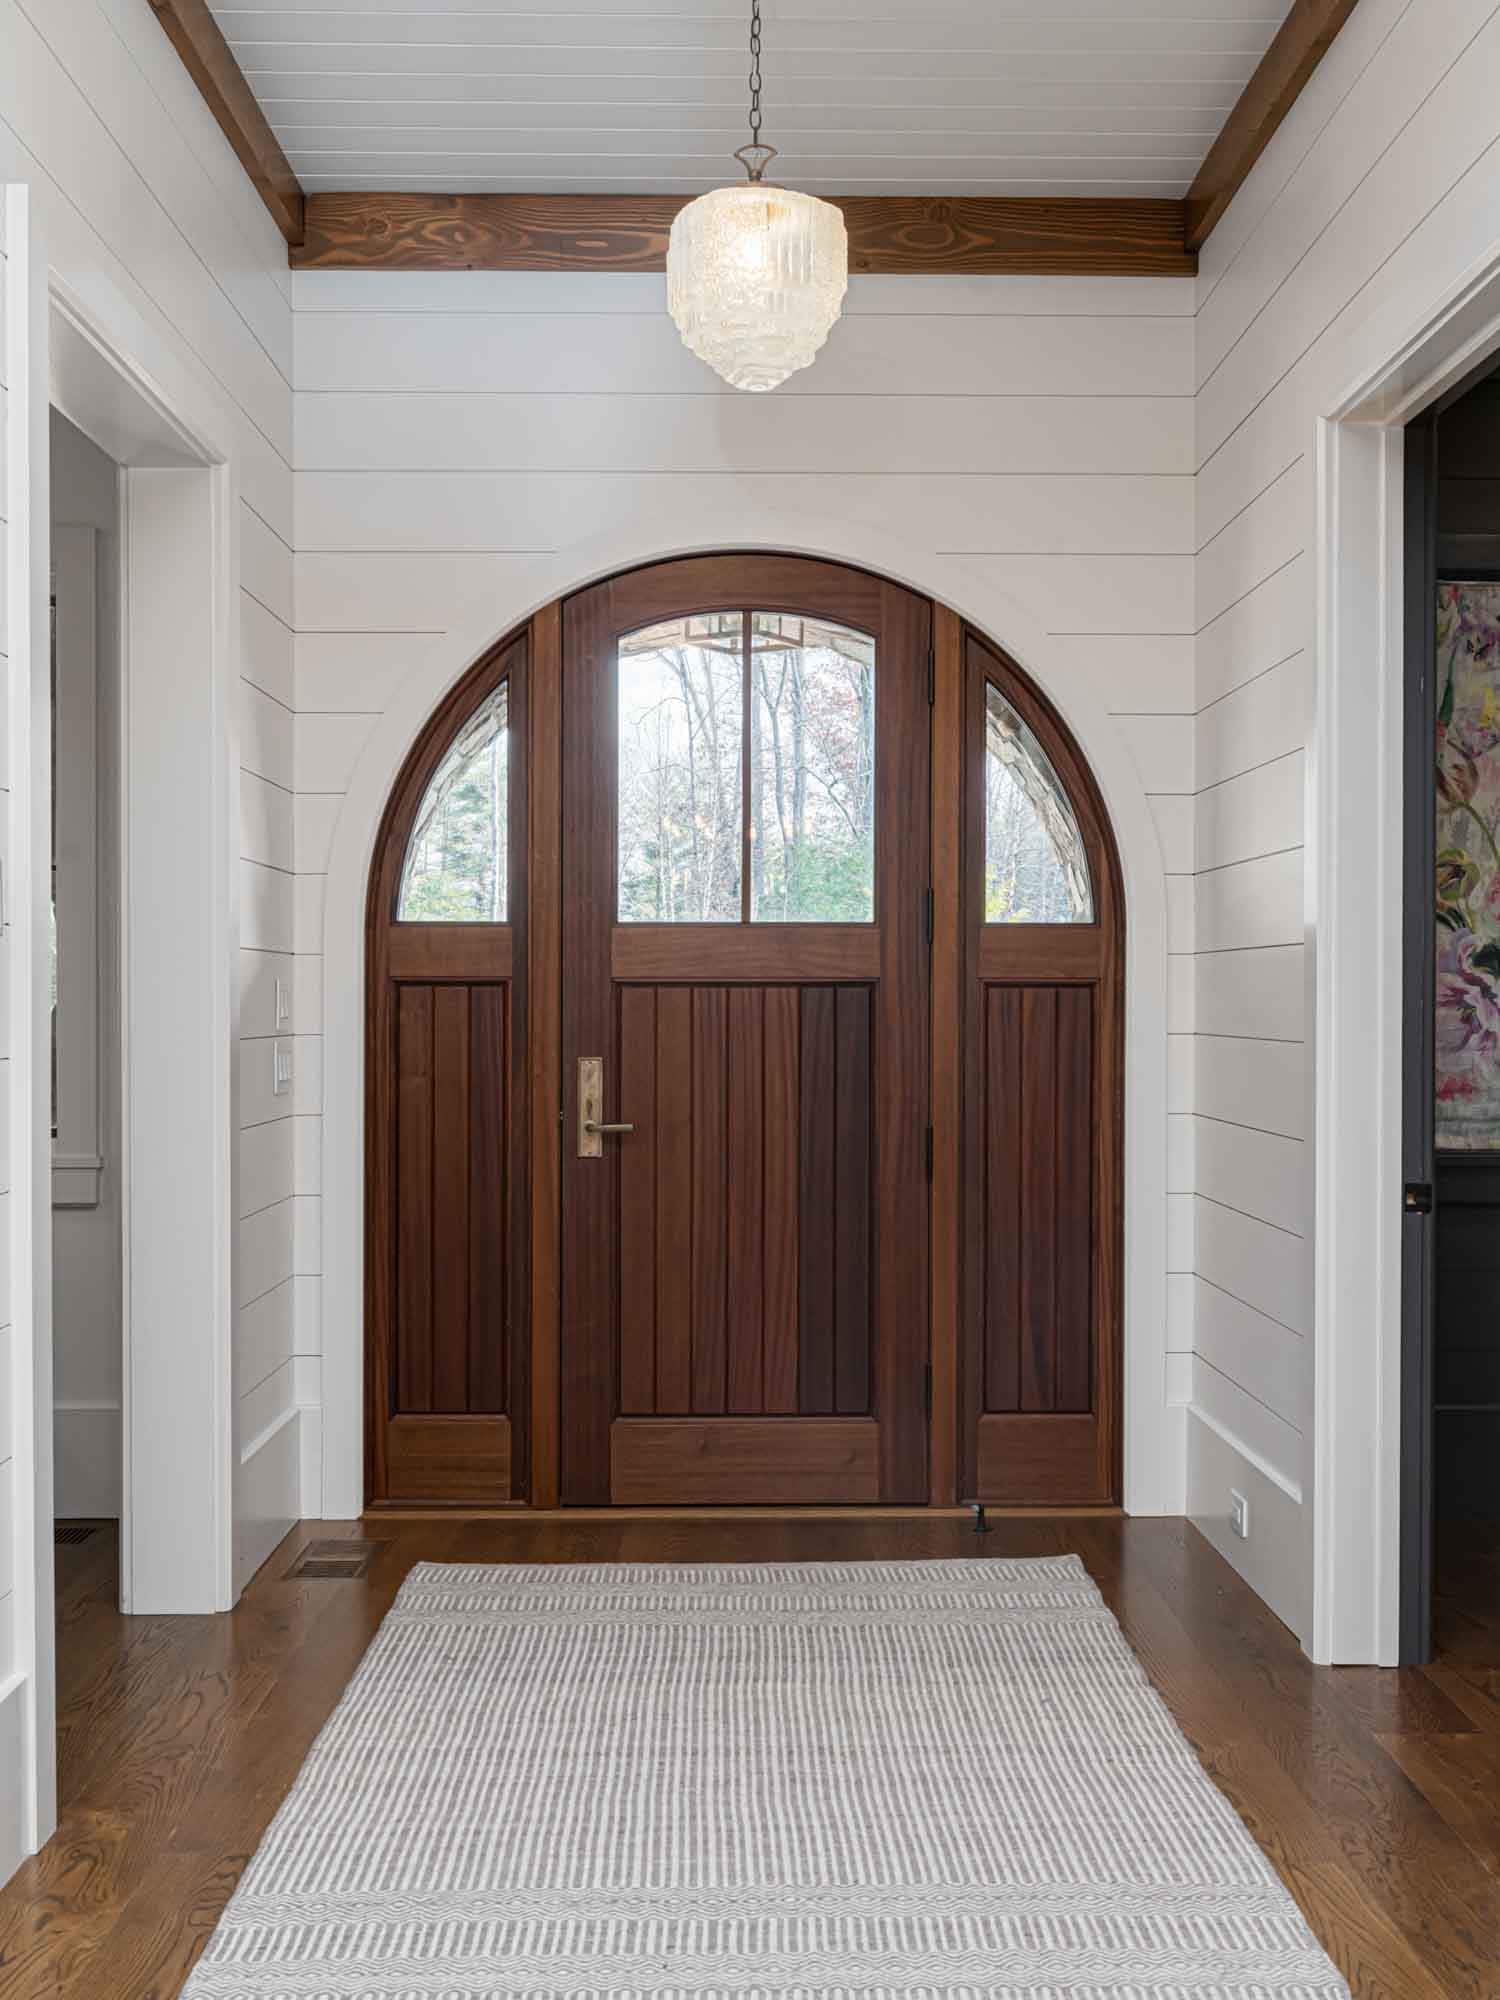 contemporary farmhouse style home entry with a curved front door